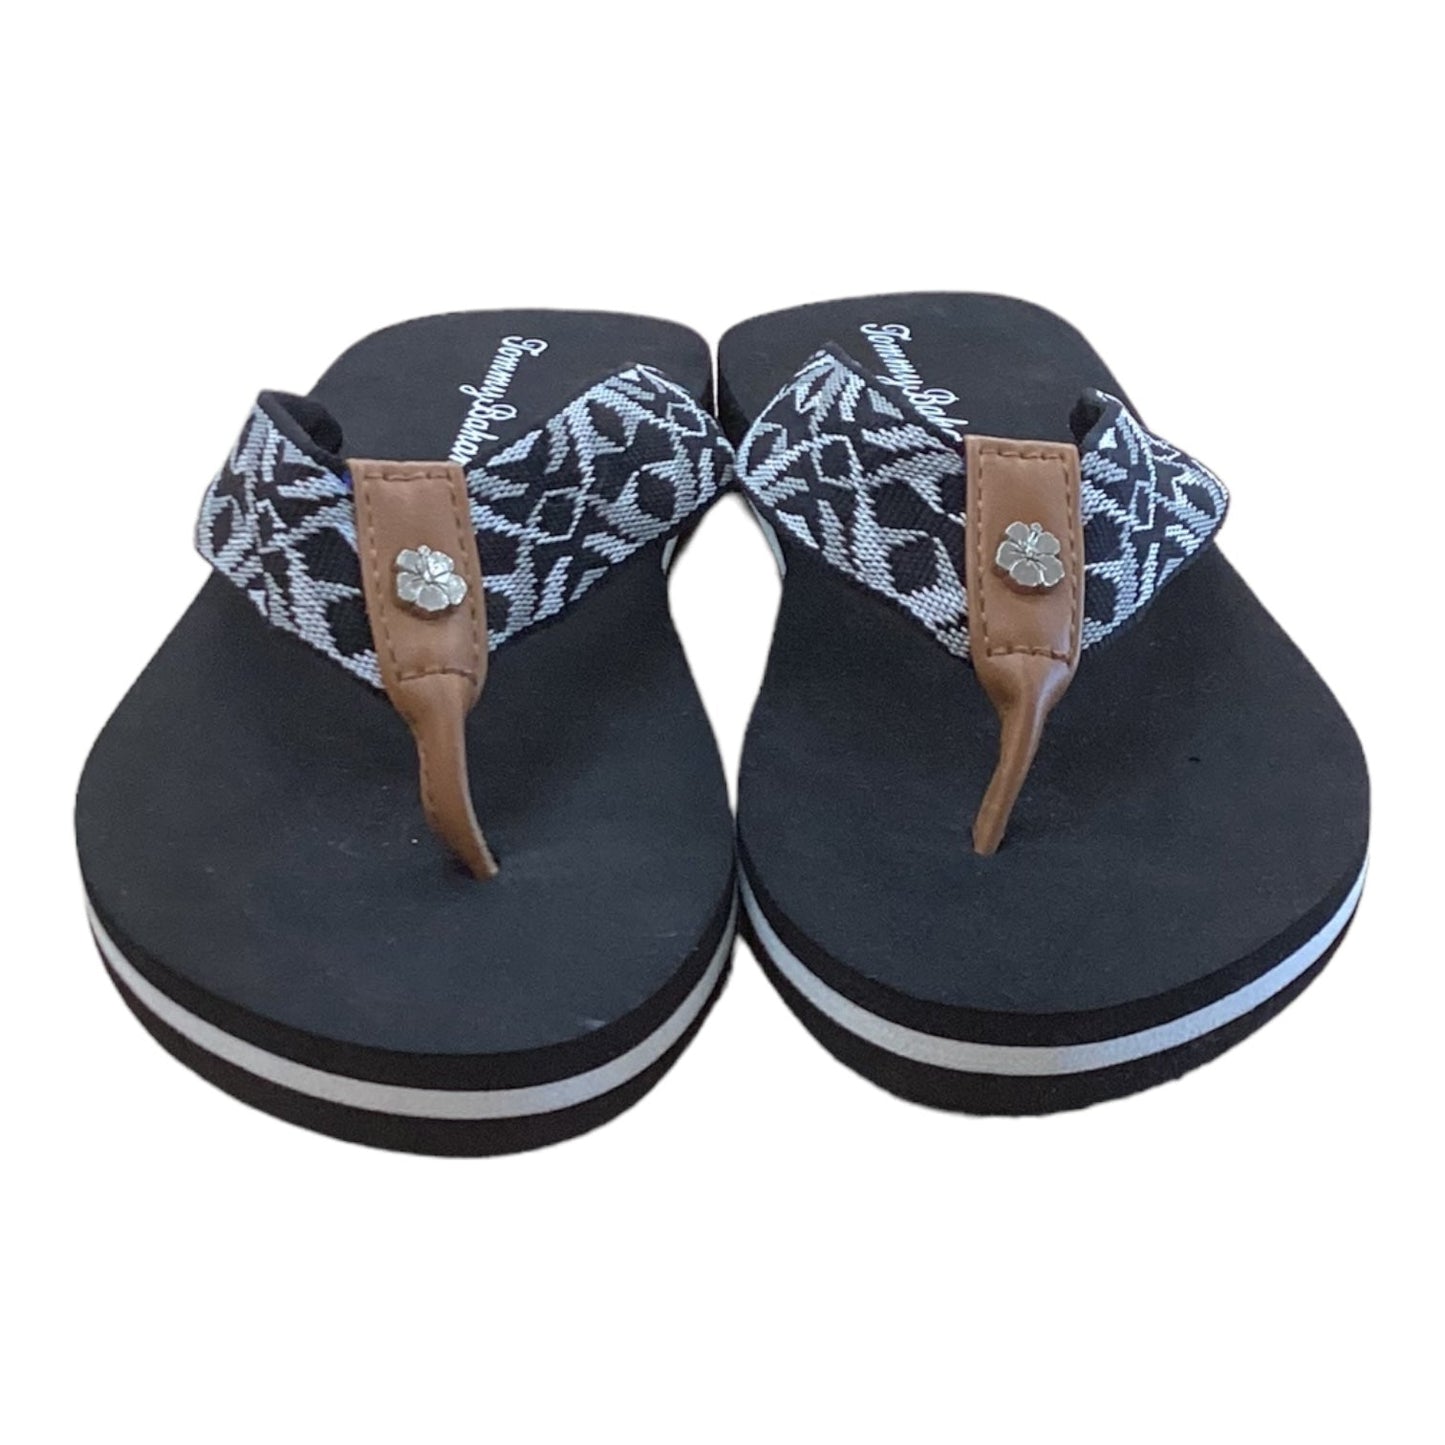 Sandals Flip Flops By Tommy Bahama  Size: 6